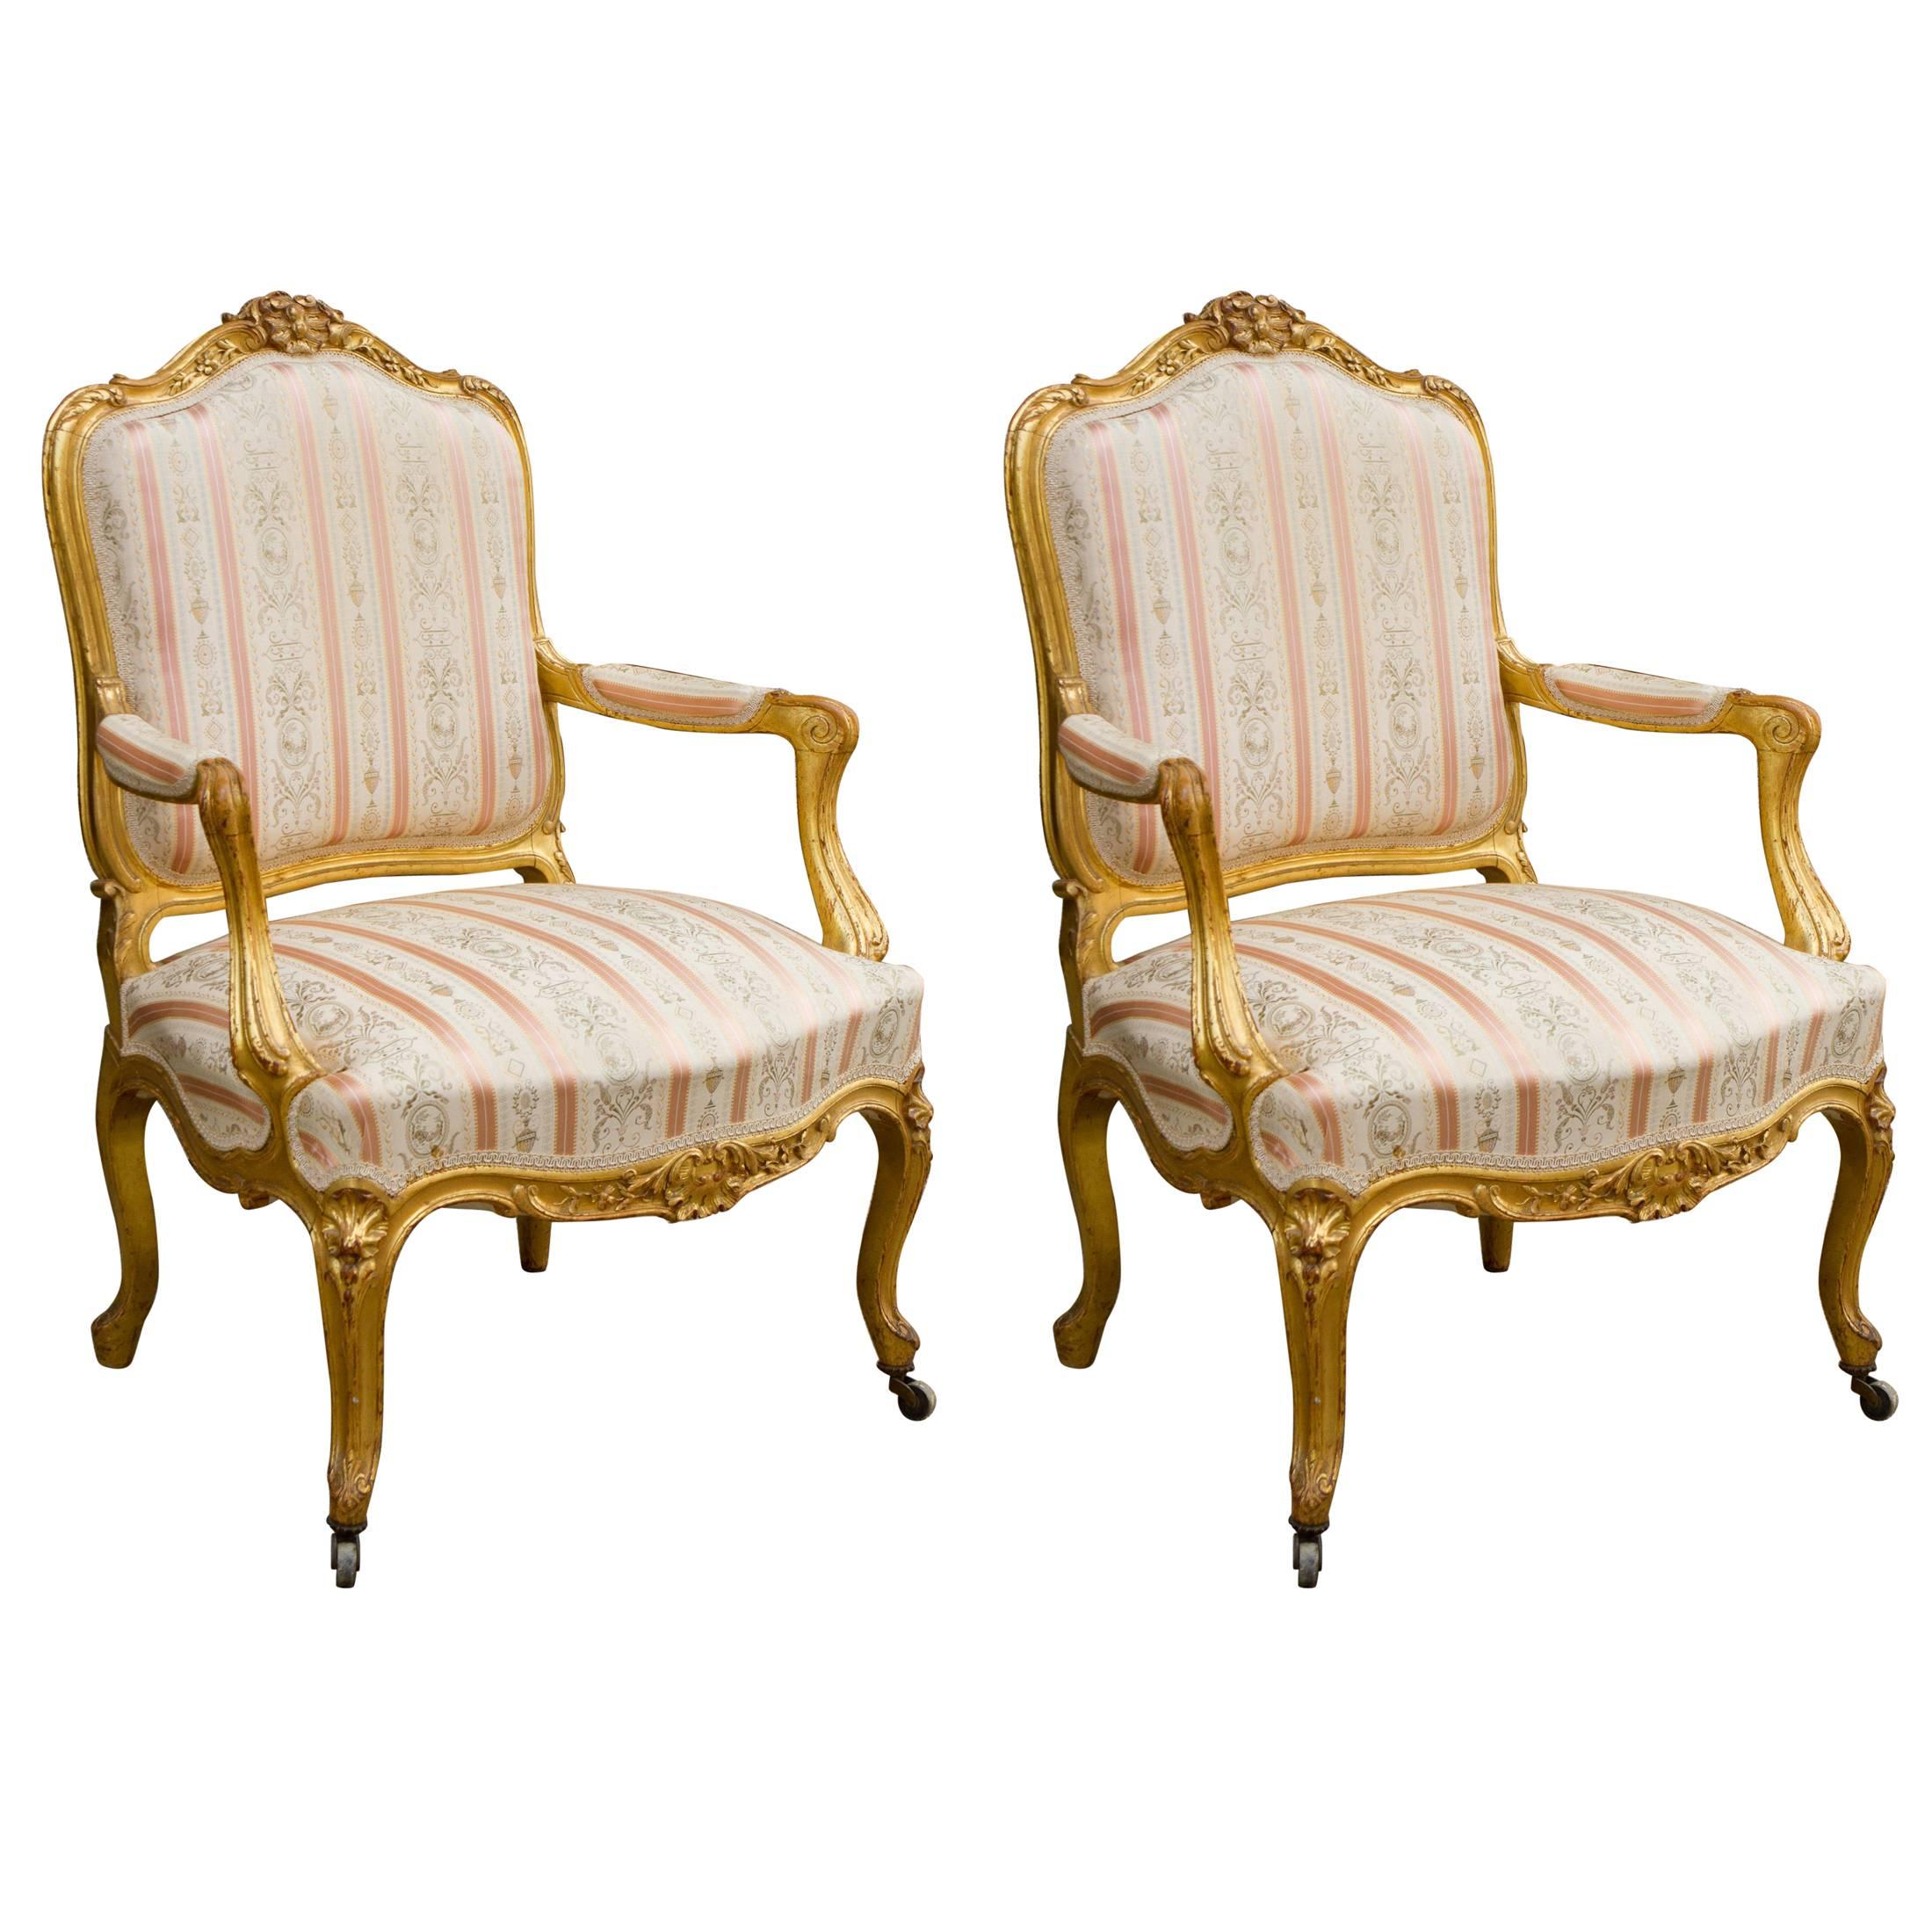 Pair of Giltwood Louis XV Style Armchairs